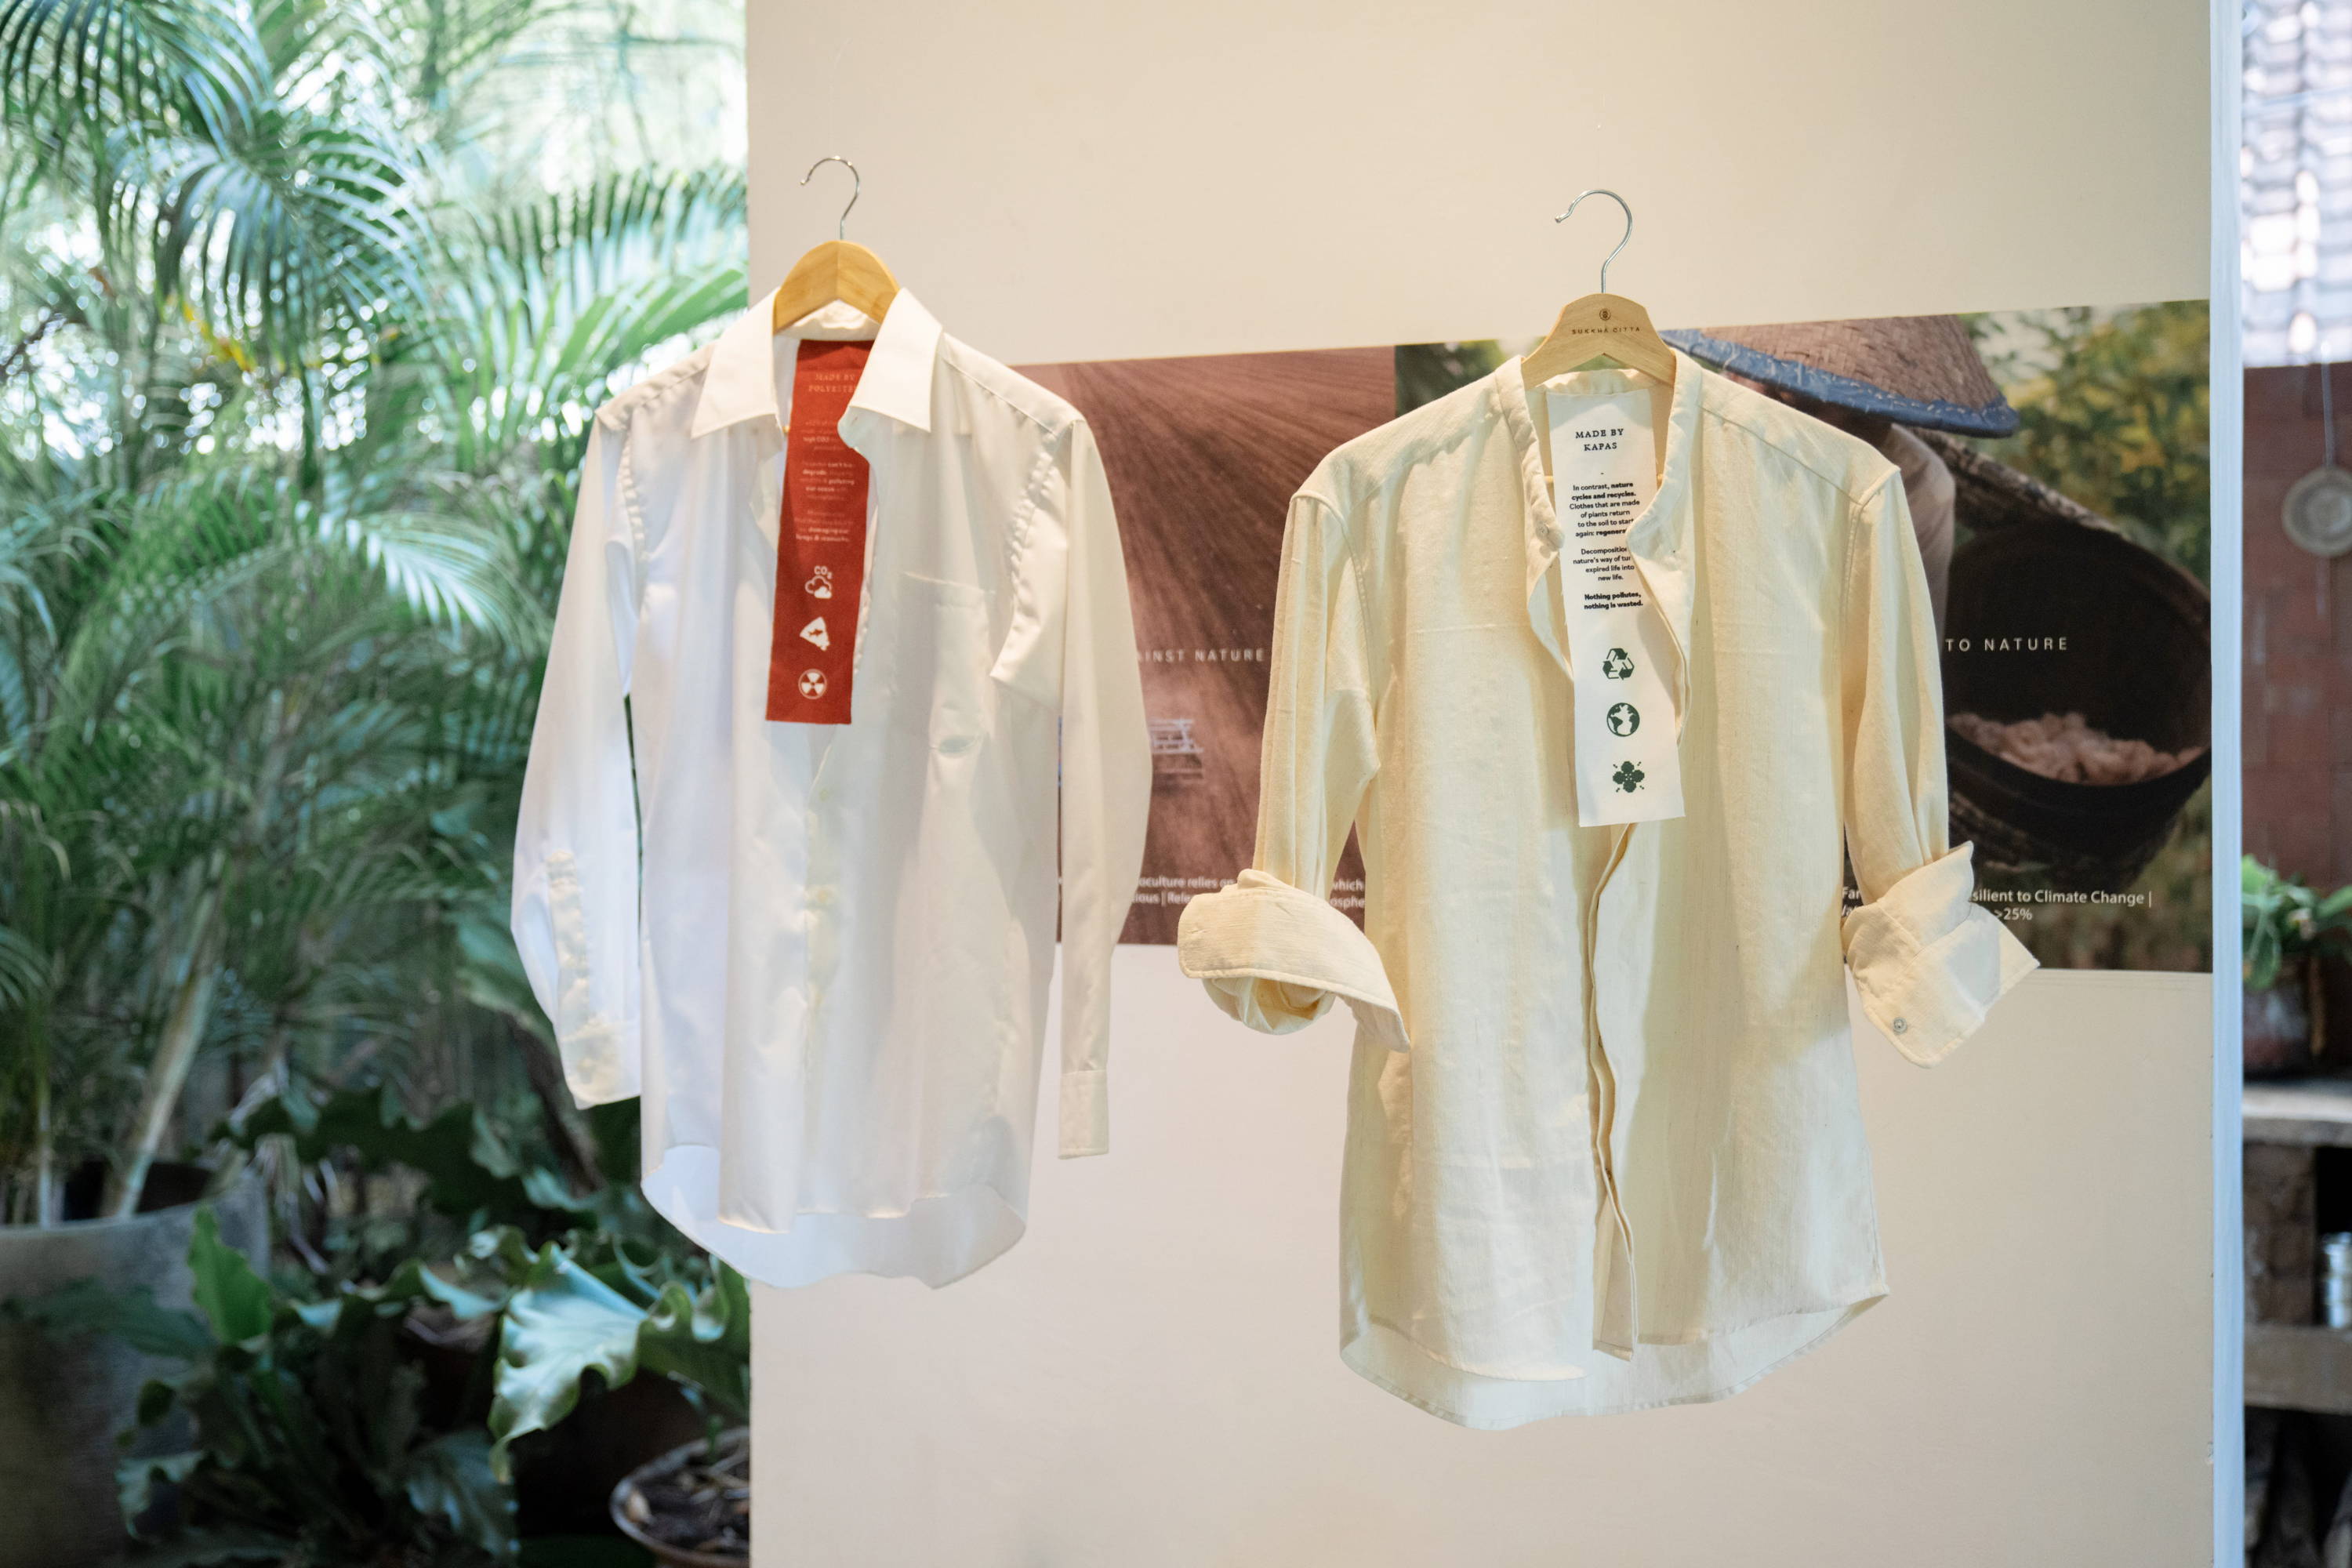 KAPAS Installation by SukkhaCitta in John Hardy Boutique & Gallery at Seminyak. A white polyester dress shirt with a red tag and a white regenerative cotton shirt with a white tag exhibited side by side. Text reads: More than 52% of clothes are made of plastic. Emits high carbon dioxide during its production. Polyester can't biodegrade, clogging landfills and polluting our ocean with microplastics. Microplastics find their way back to us, damaging our lungs and stomachs. In contrast, nature cycles and recycles. Clothes that are made of plants return to the soil to start again: regenerates. Decomposition is nature's way of turning expired life into new life. Nothing pollutes, nothing is wasted.